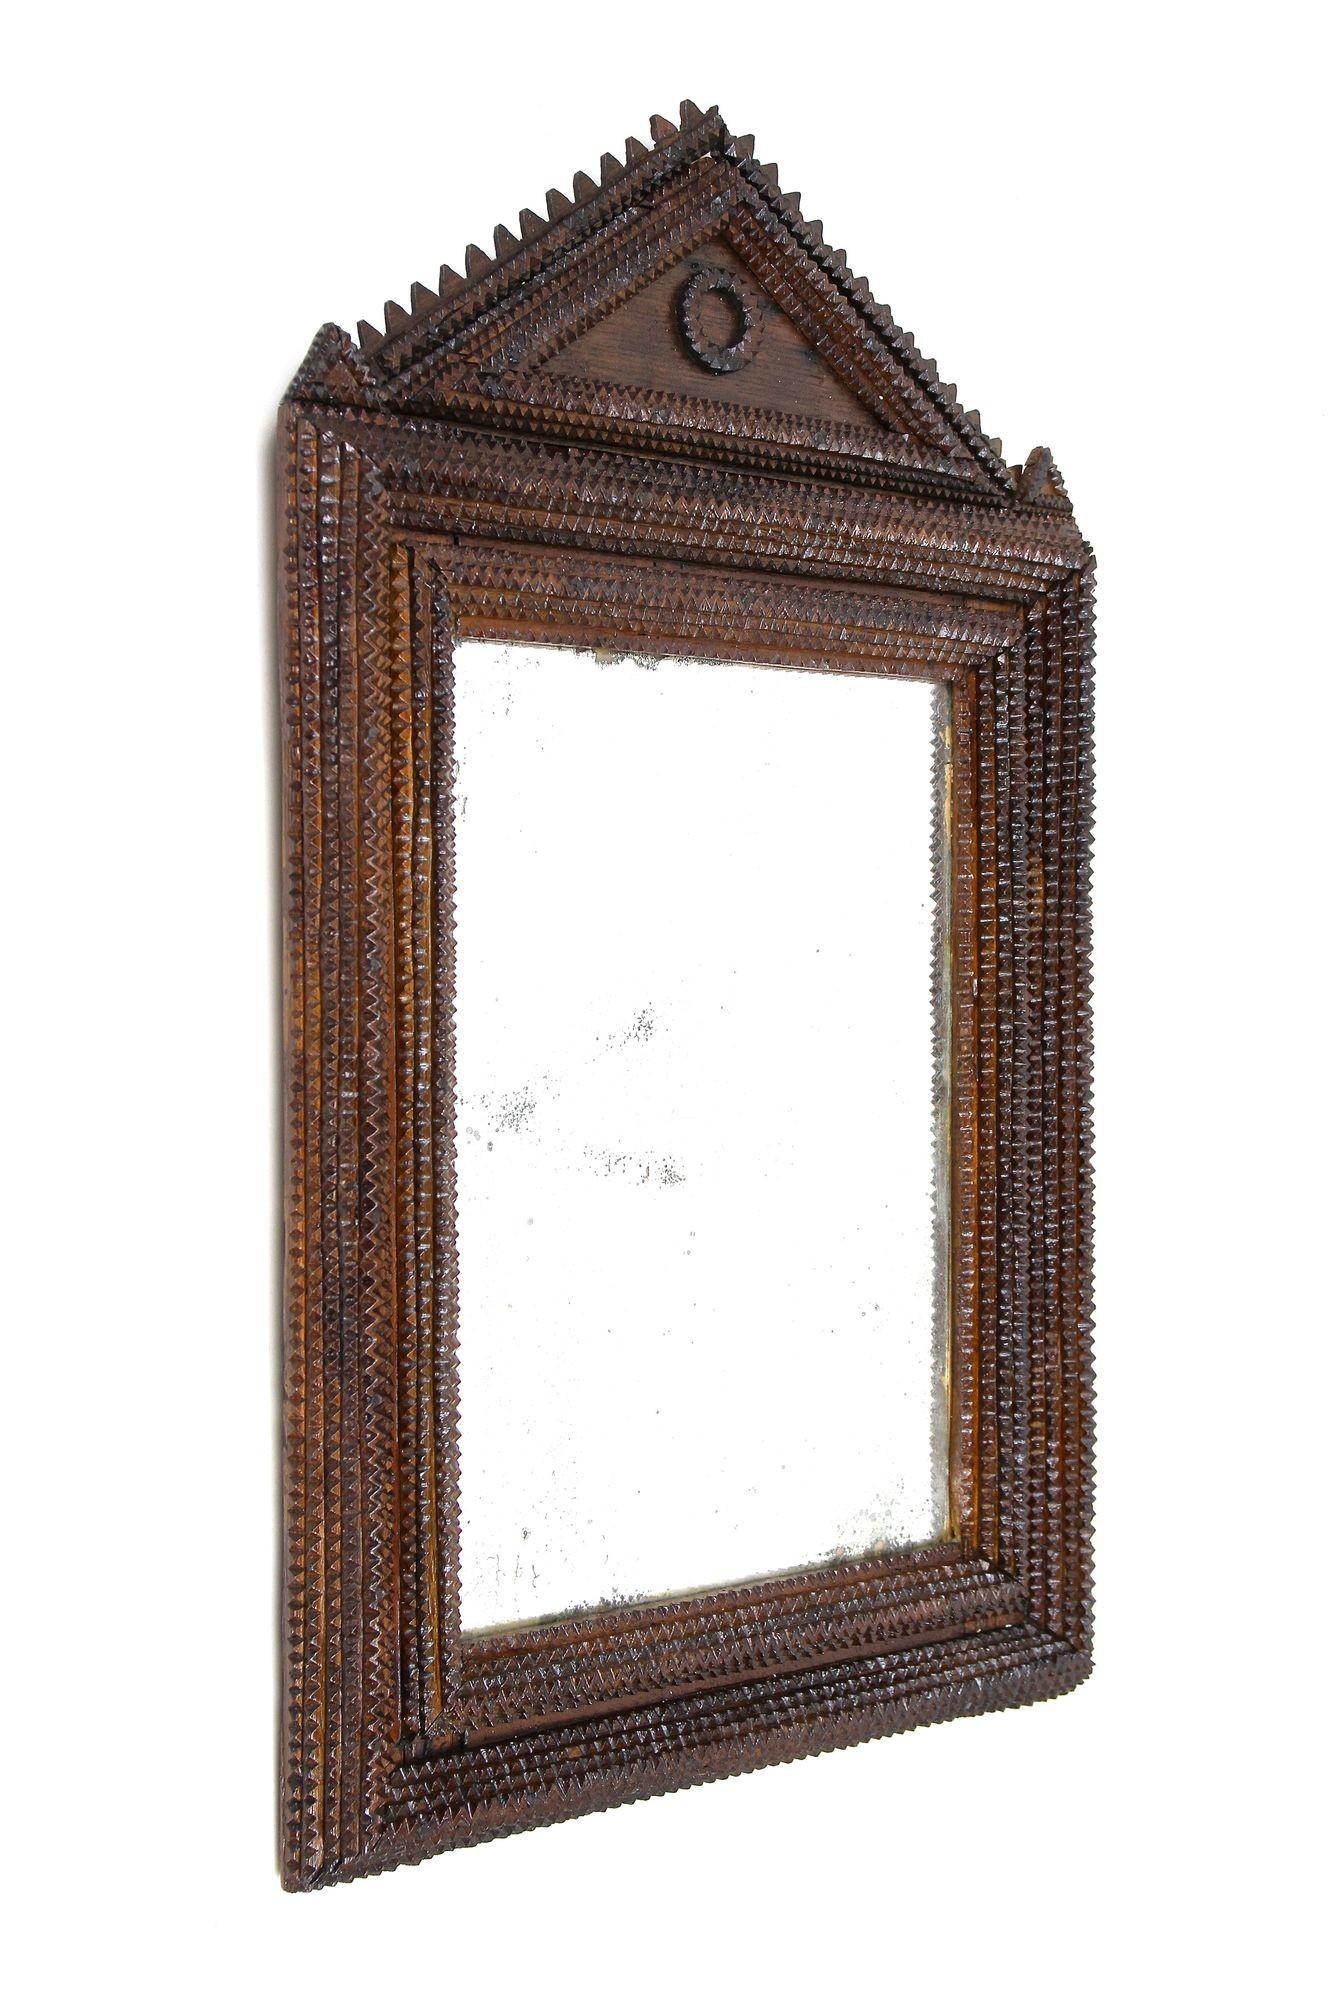 Very old, rare example of a hand-carved tramp art wall mirror, elaborately made in Austria in the period around 1860. Handcrafted from basswood, this detailed Tramp Art mirror was done in the so called 